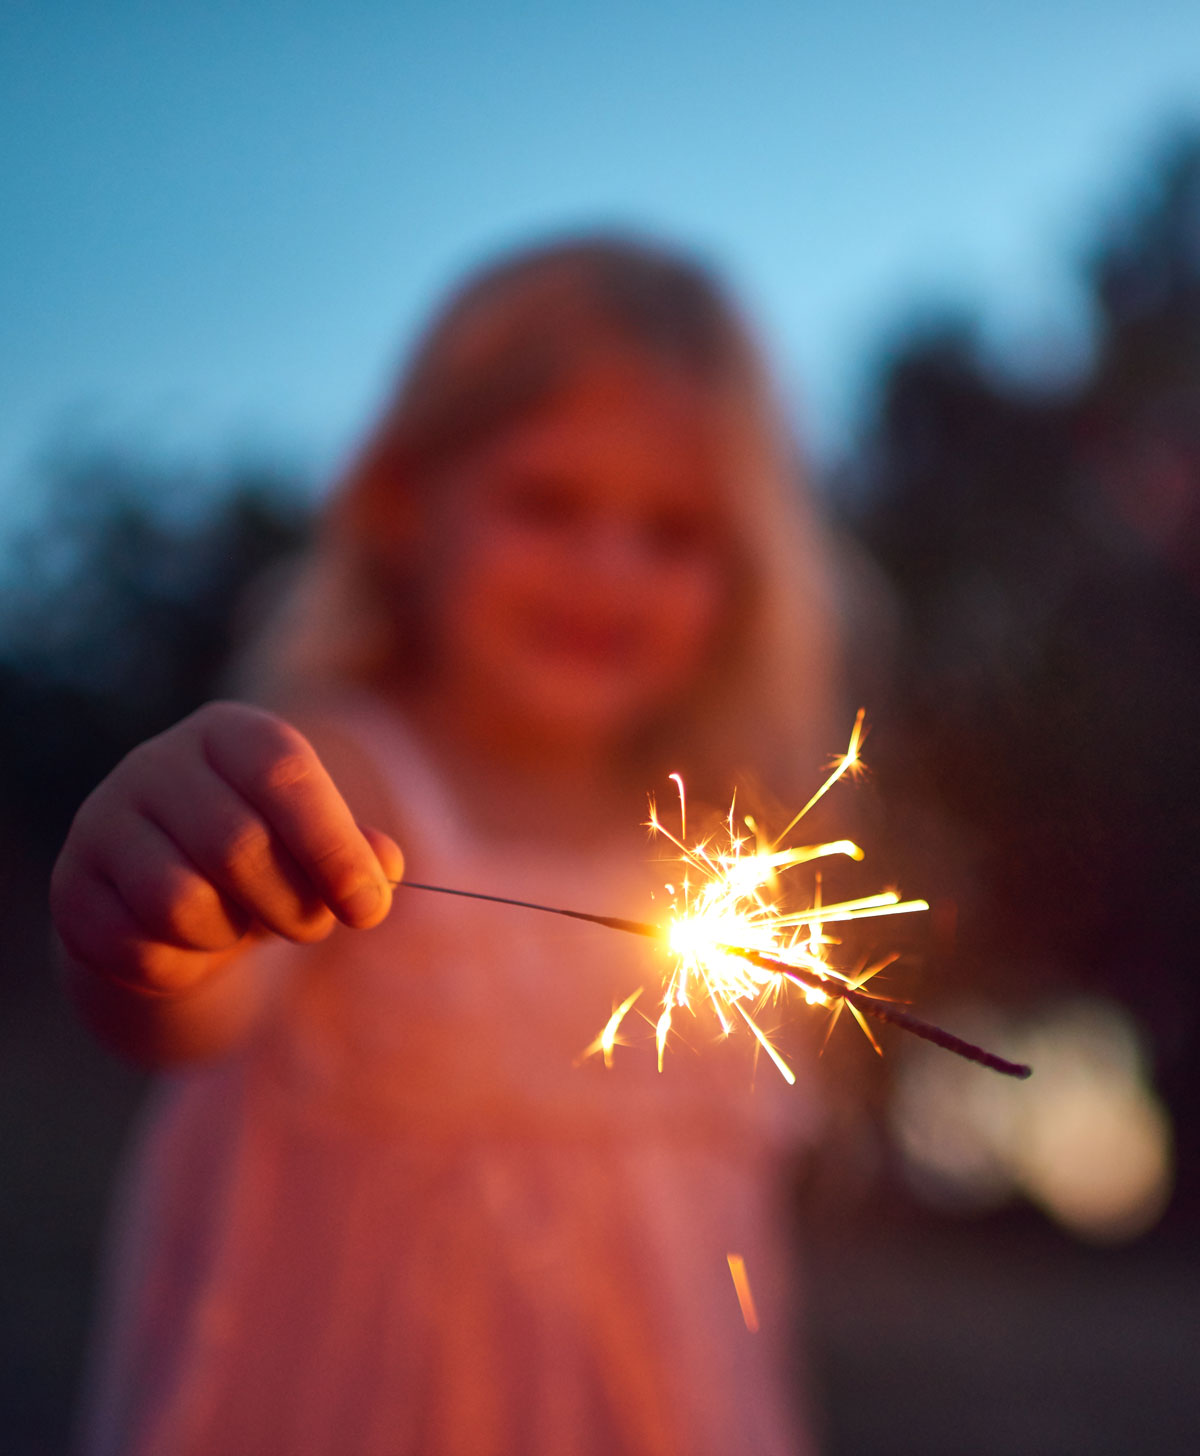 Fireworks-Related Lower Extremity Injuries Treated at United States Emergency Departments